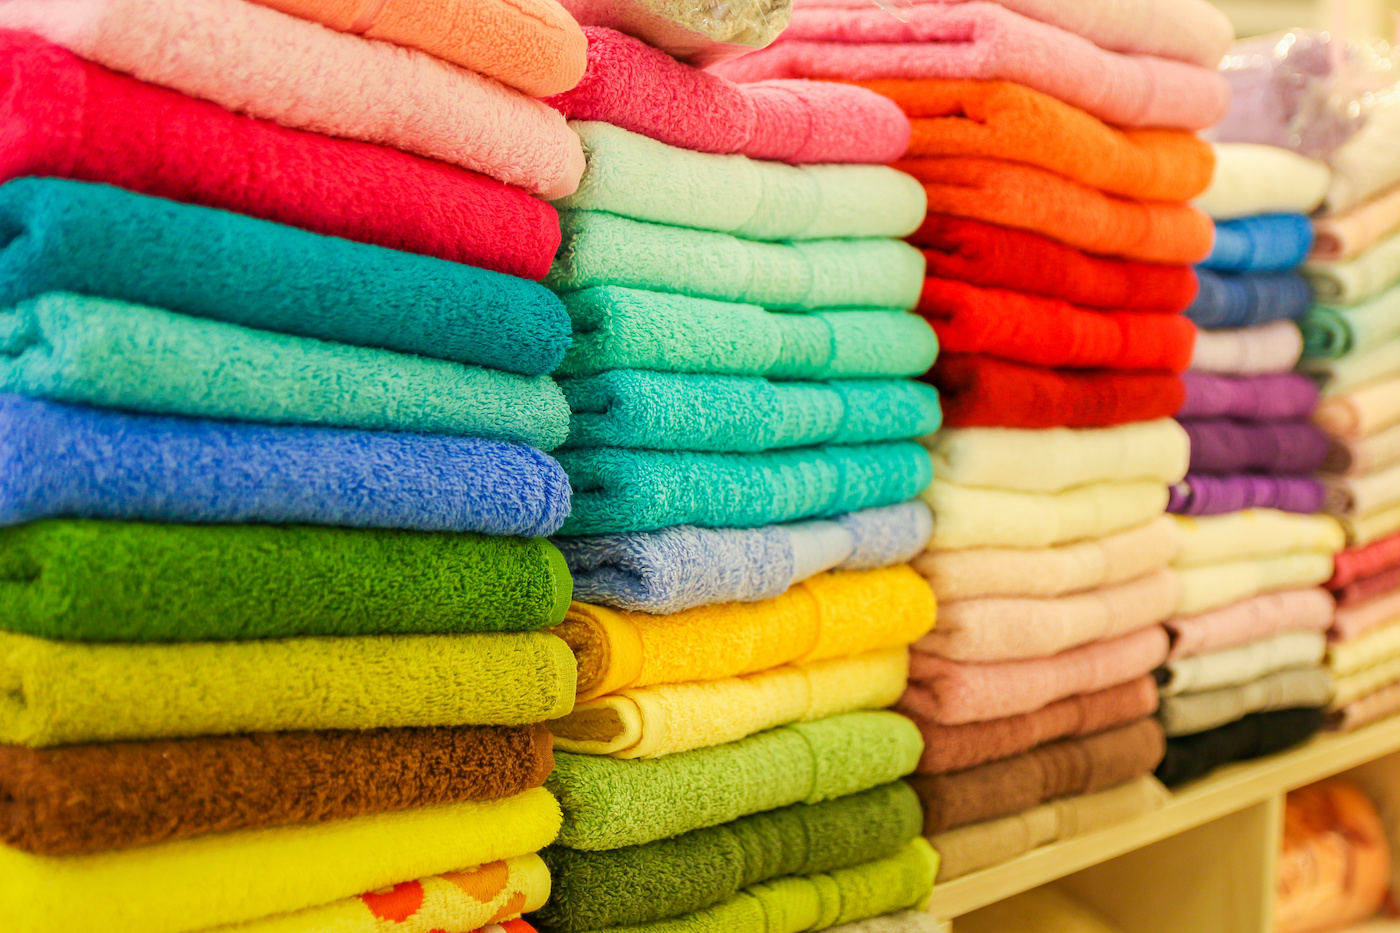 Piles-of-colorful-towels-stacked